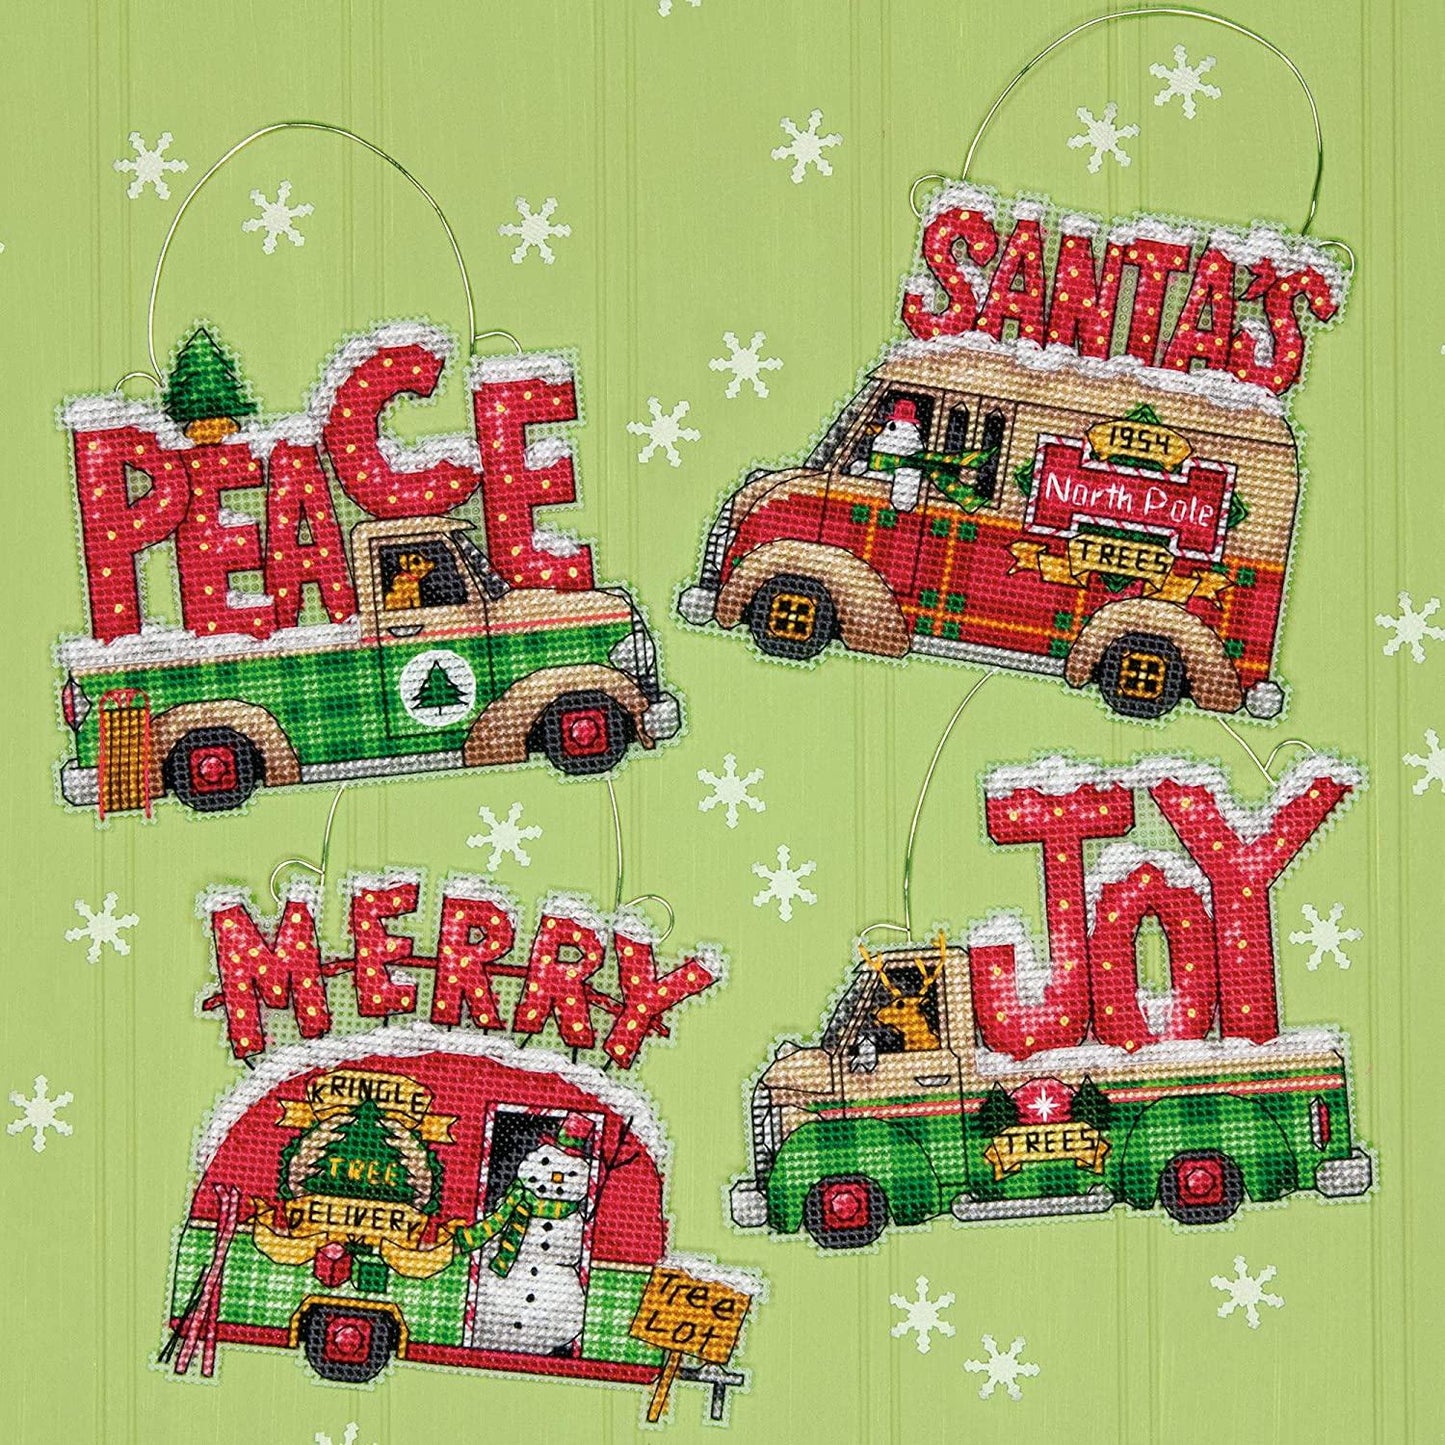 HOLIDAY TRUCK ORNAMENTS, Counted Cross Stitch Kit, 14 count clear plastic canvas, DIMENSIONS (70-08974) - Leo Hobby